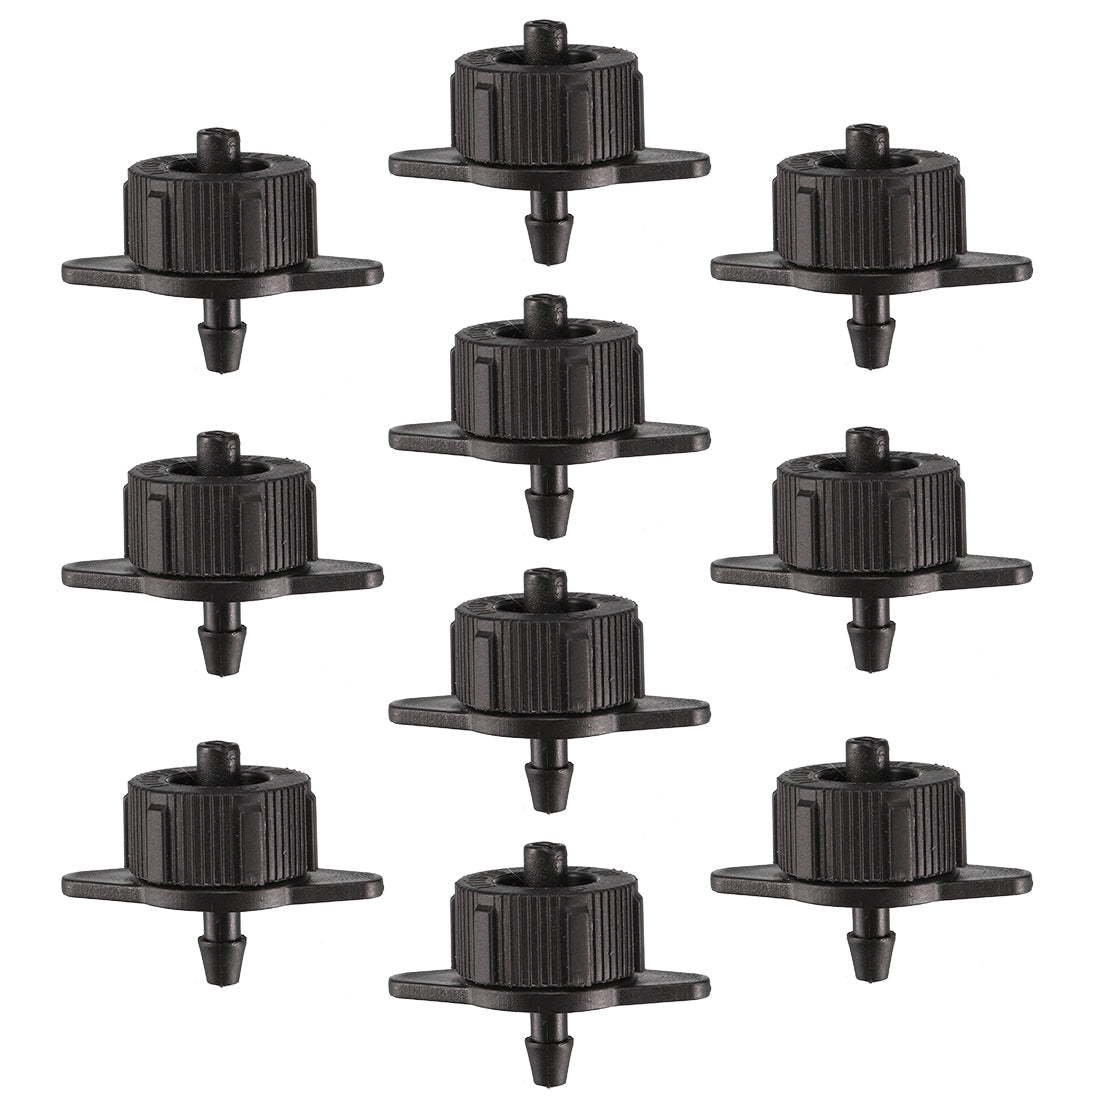 uxcell Uxcell Pressure Compensating Dripper 1 GPH 4L/H Emitter for Garden Lawn Drip Irrigation with Barbed Hose Connector, Plastic Black 15pcs